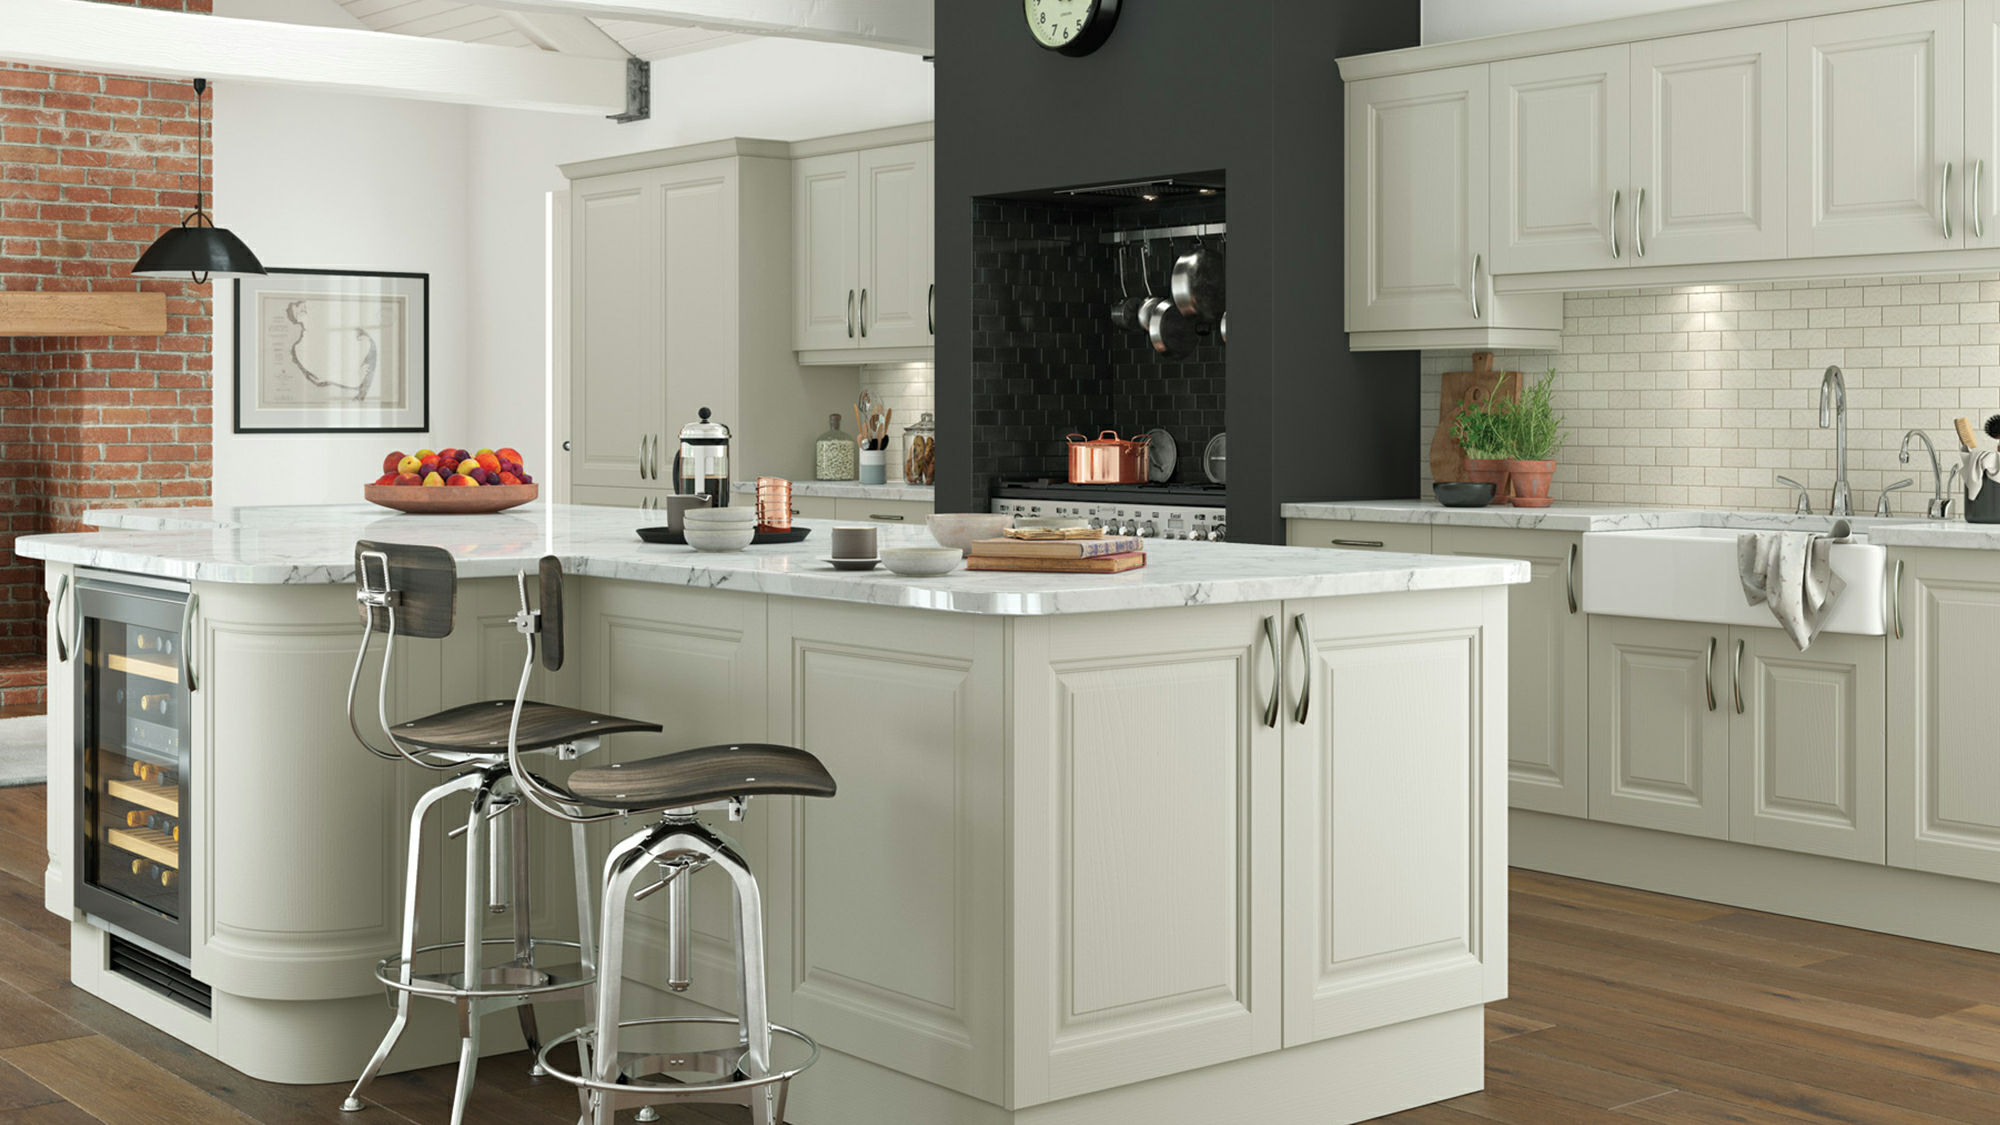 Jefferson solid wood mussel kitchens combining robust construction with a gentle, inviting color